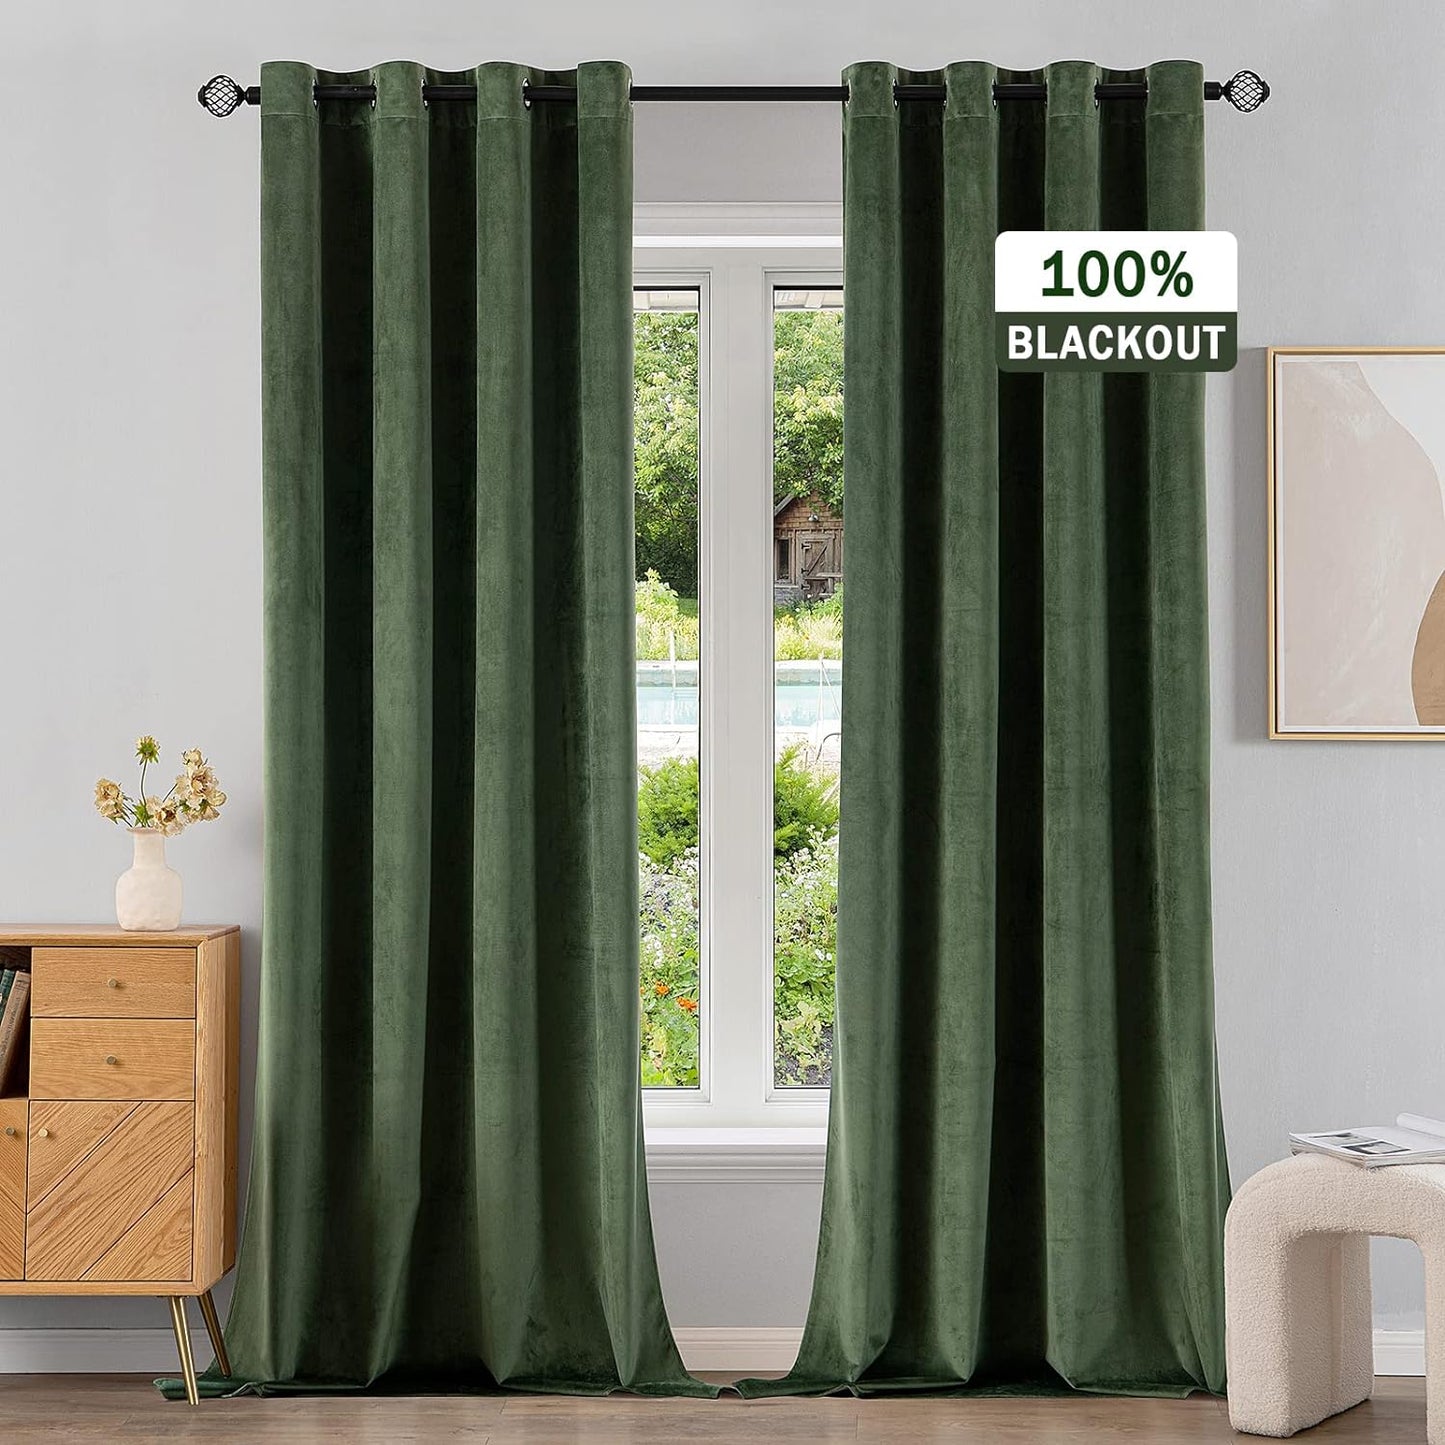 EMEMA Olive Green Velvet Curtains 84 Inch Length 2 Panels Set, Room Darkening Luxury Curtains, Grommet Thermal Insulated Drapes, Window Curtains for Living Room, W52 X L84, Olive Green  EMEMA 100 Blackout/ Olive Green W52" X L96" 